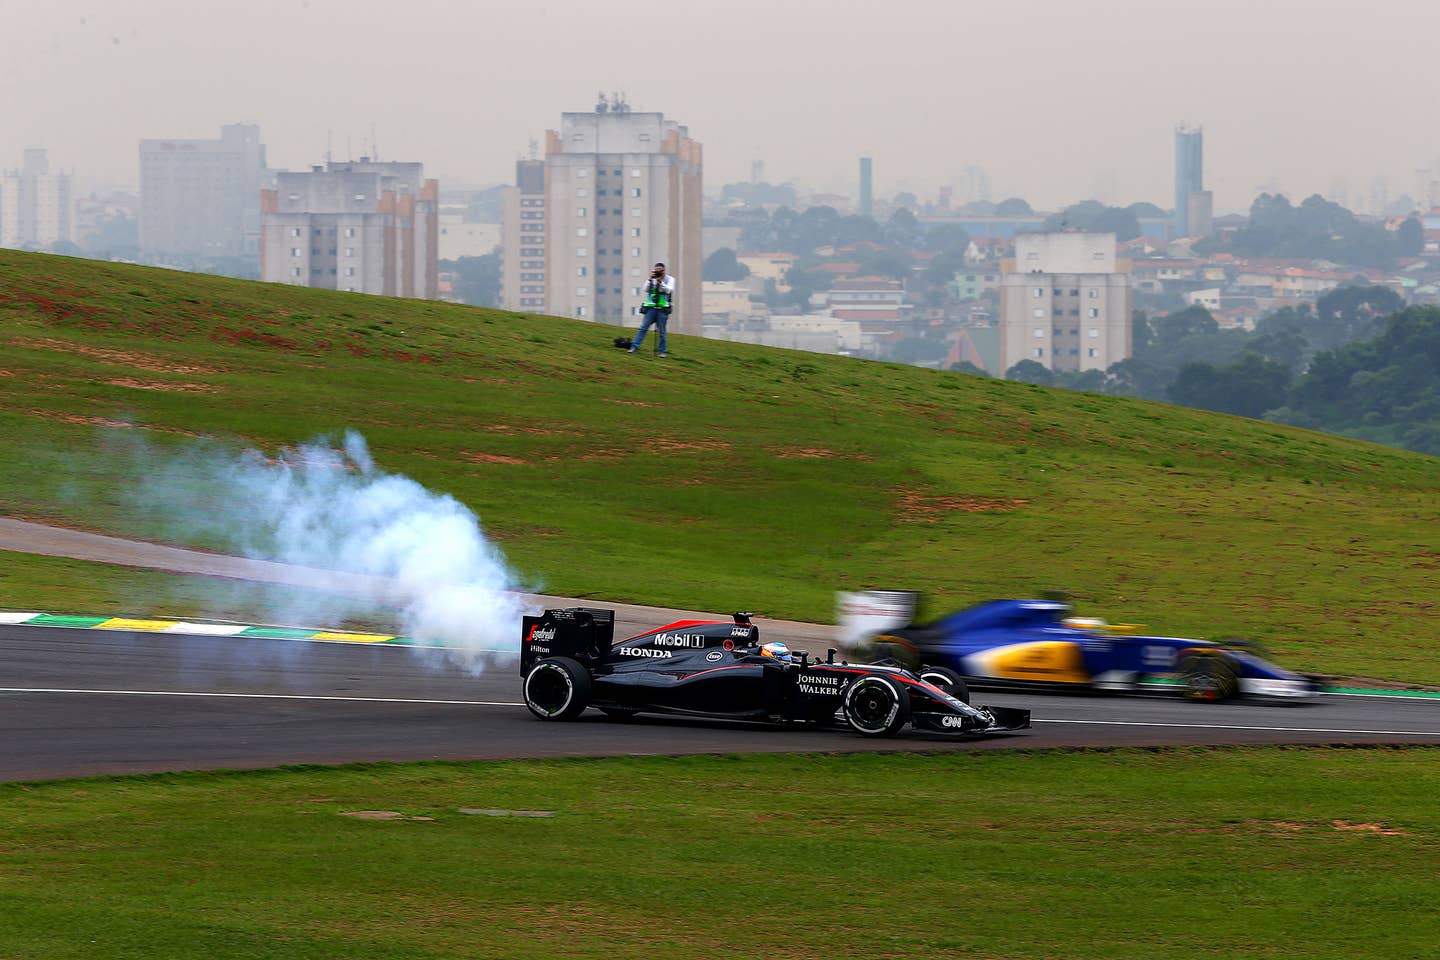 <em>Smoke billows from the car of Fernando Alonso of Spain and McLaren Honda as he stops on the track during practice for the Grand Prix of Brazil on November 13, 2015. (Photo by Clive Mason/Getty Images)</em>